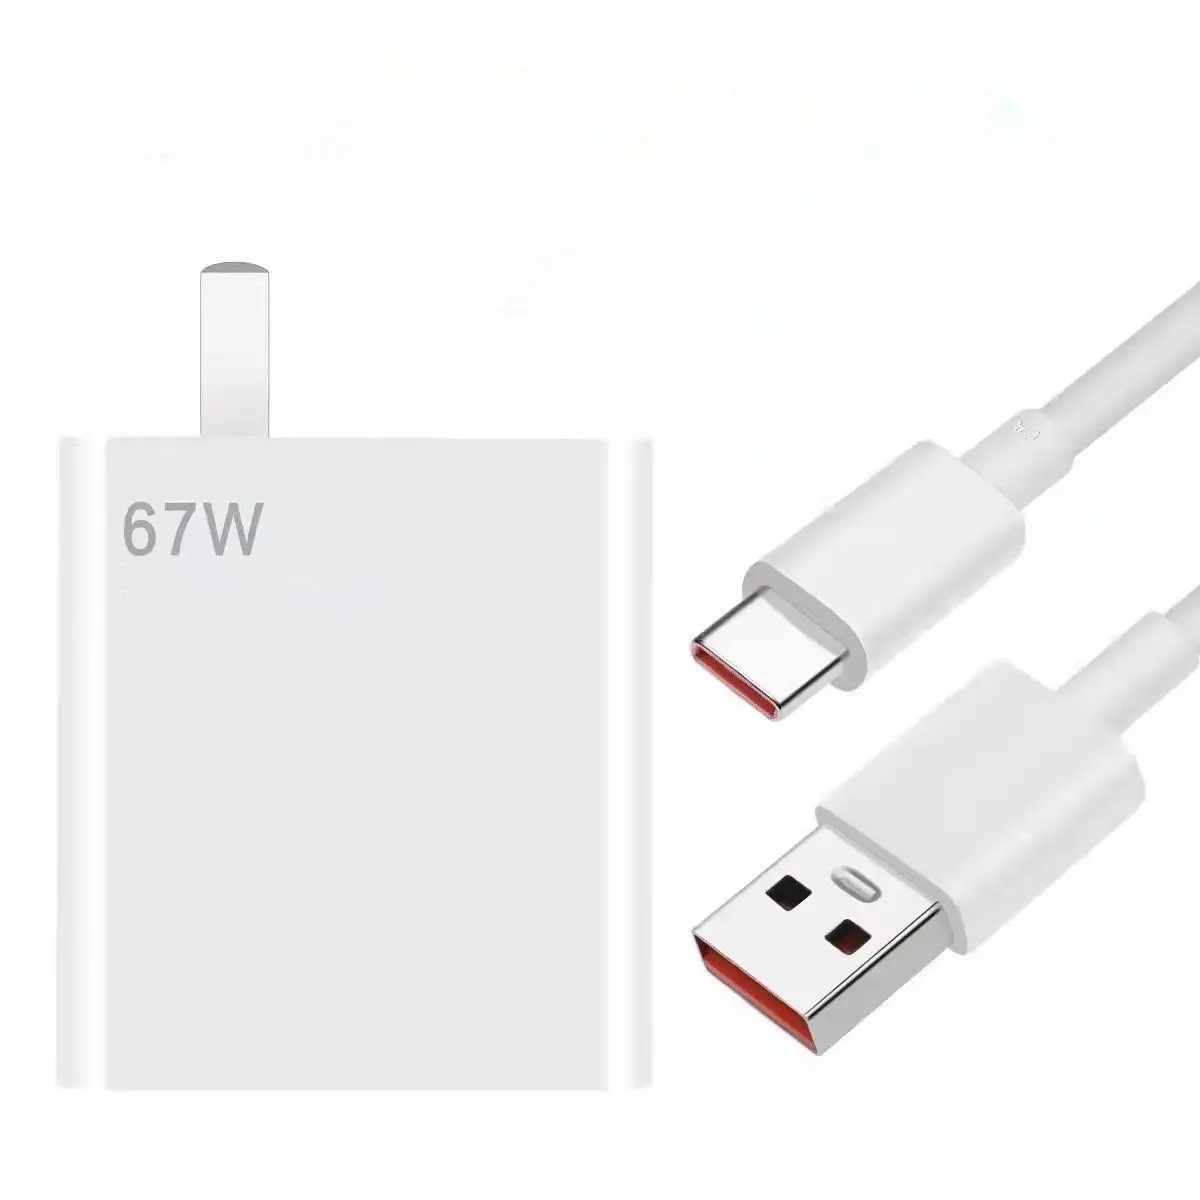 Original 6A Fast charging cables 67W USB-C Power Adapter for Redmi note 9 pro for Xiaomi 10 9 9T pro note 10 10X LITE for Huawei